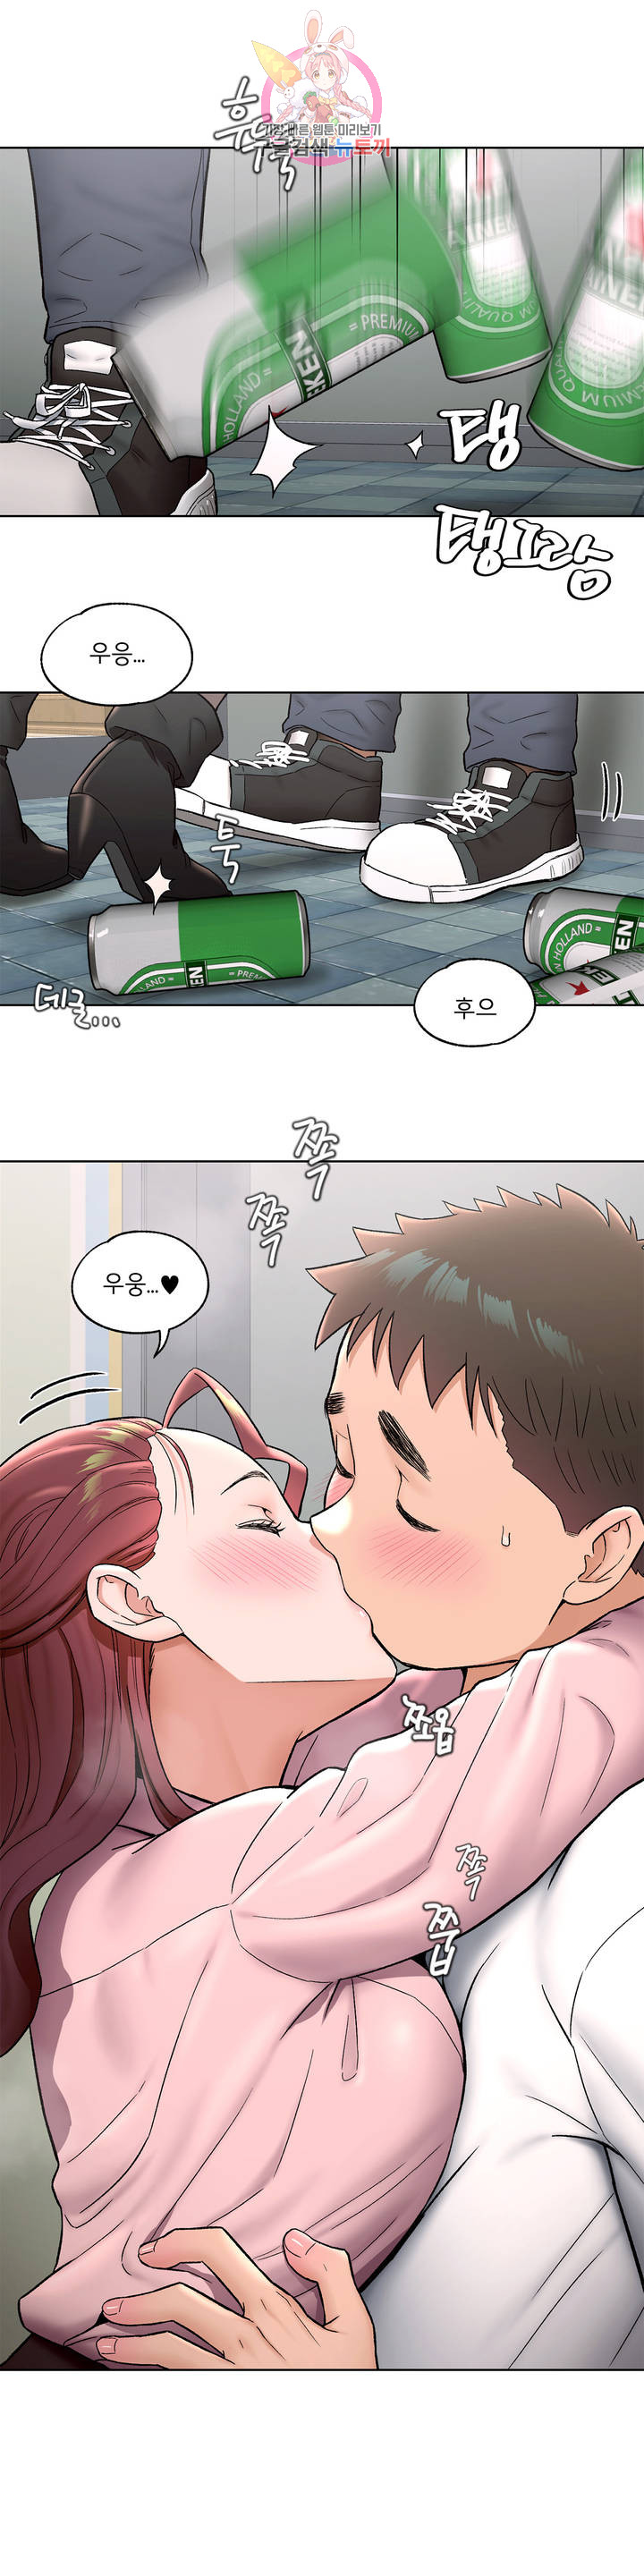 Sexercise Raw - Chapter 61 Page 2